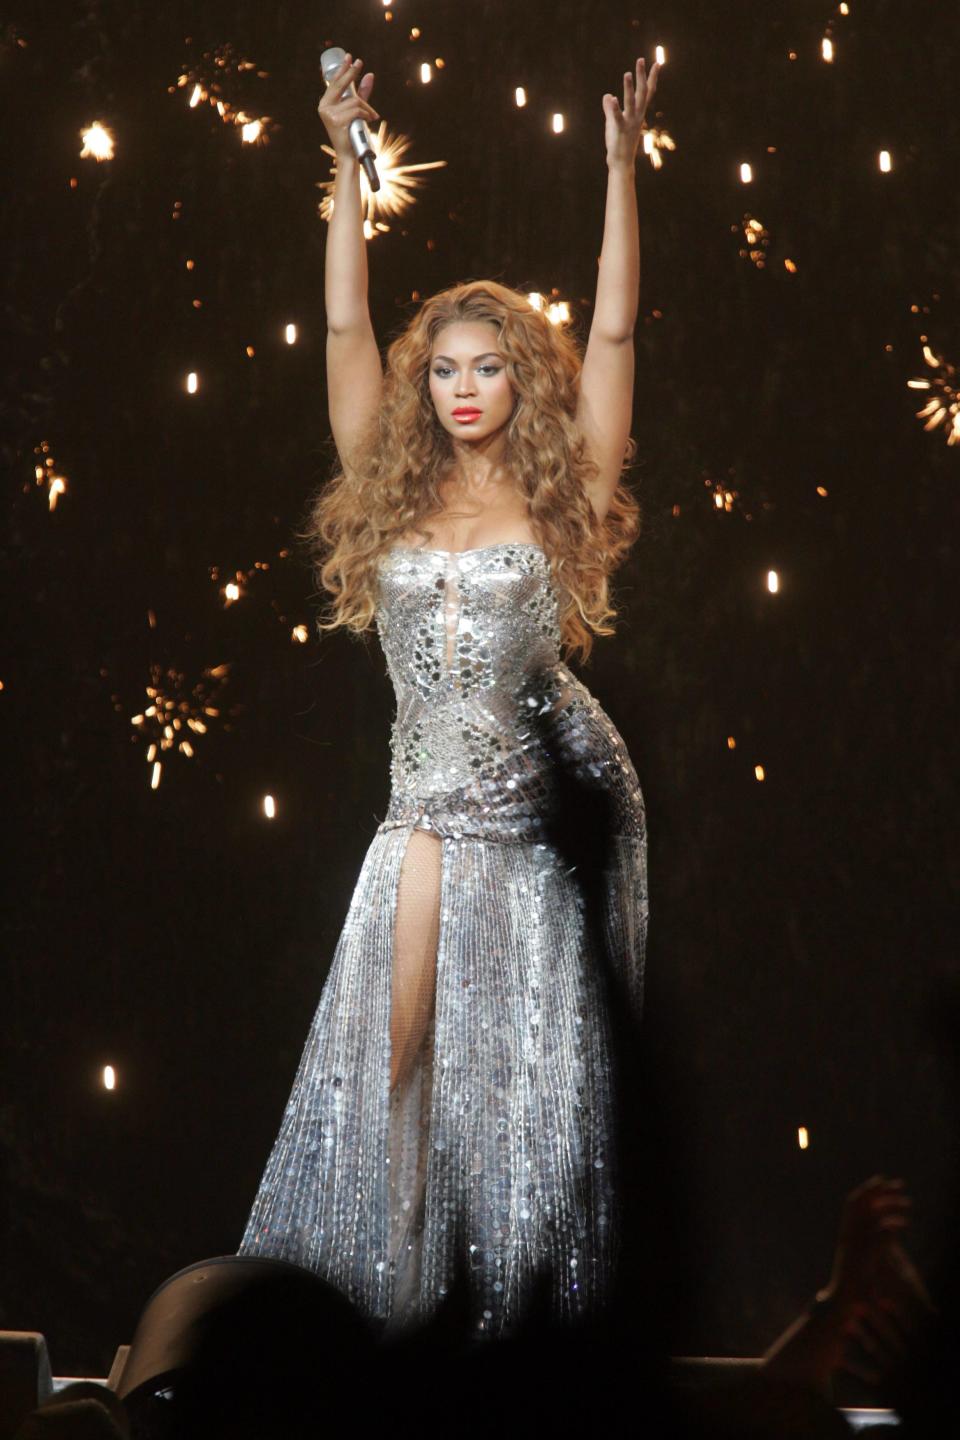 Beyonce performs at the Sommet Center in Nashville, Tenn., on July 18, 2007. This was the third consecutive year the pop/R&B superstar has performed in Nashville.